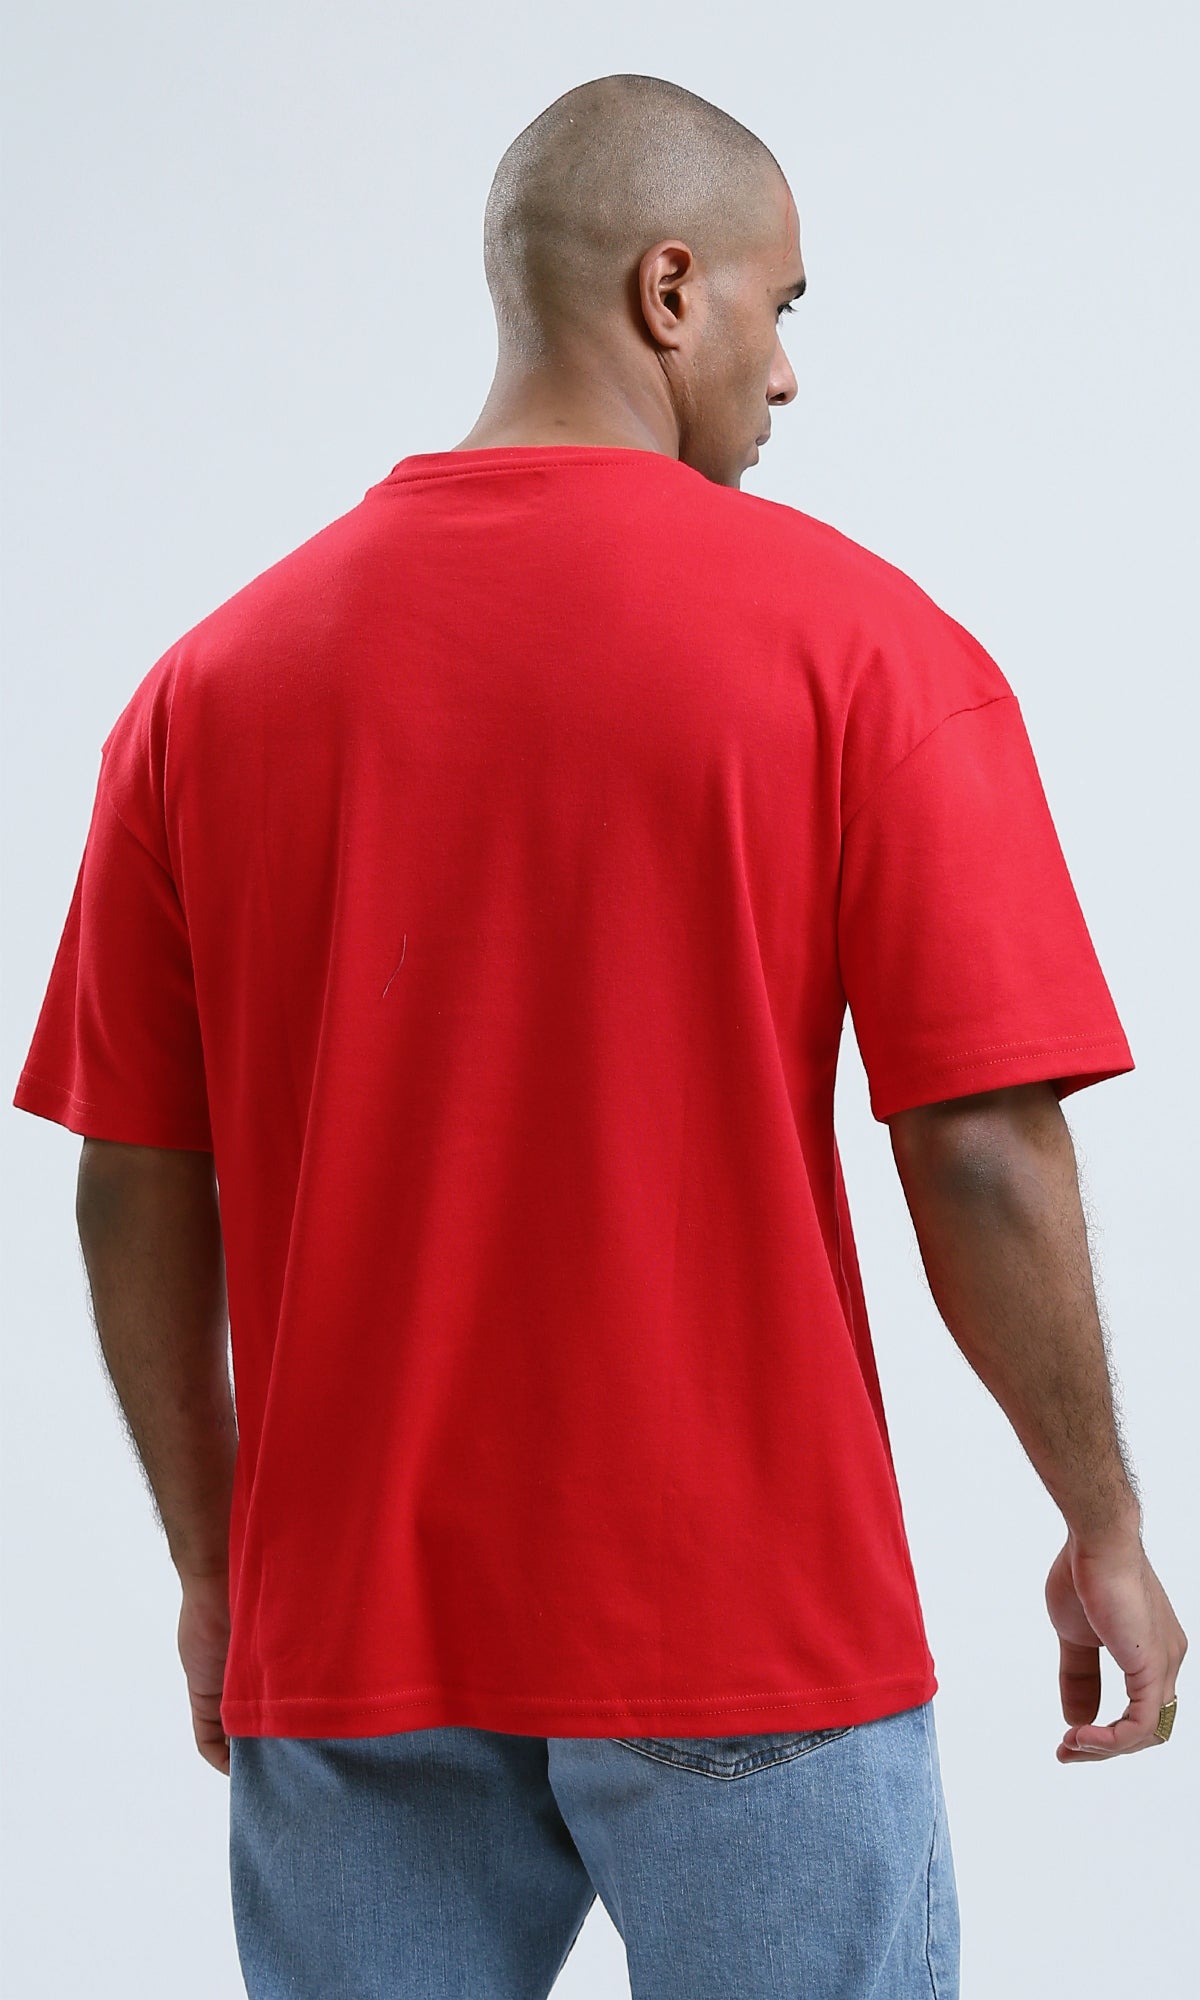 O190192 Relaxed Fit Printed Red Tee With Elbow Sleeves